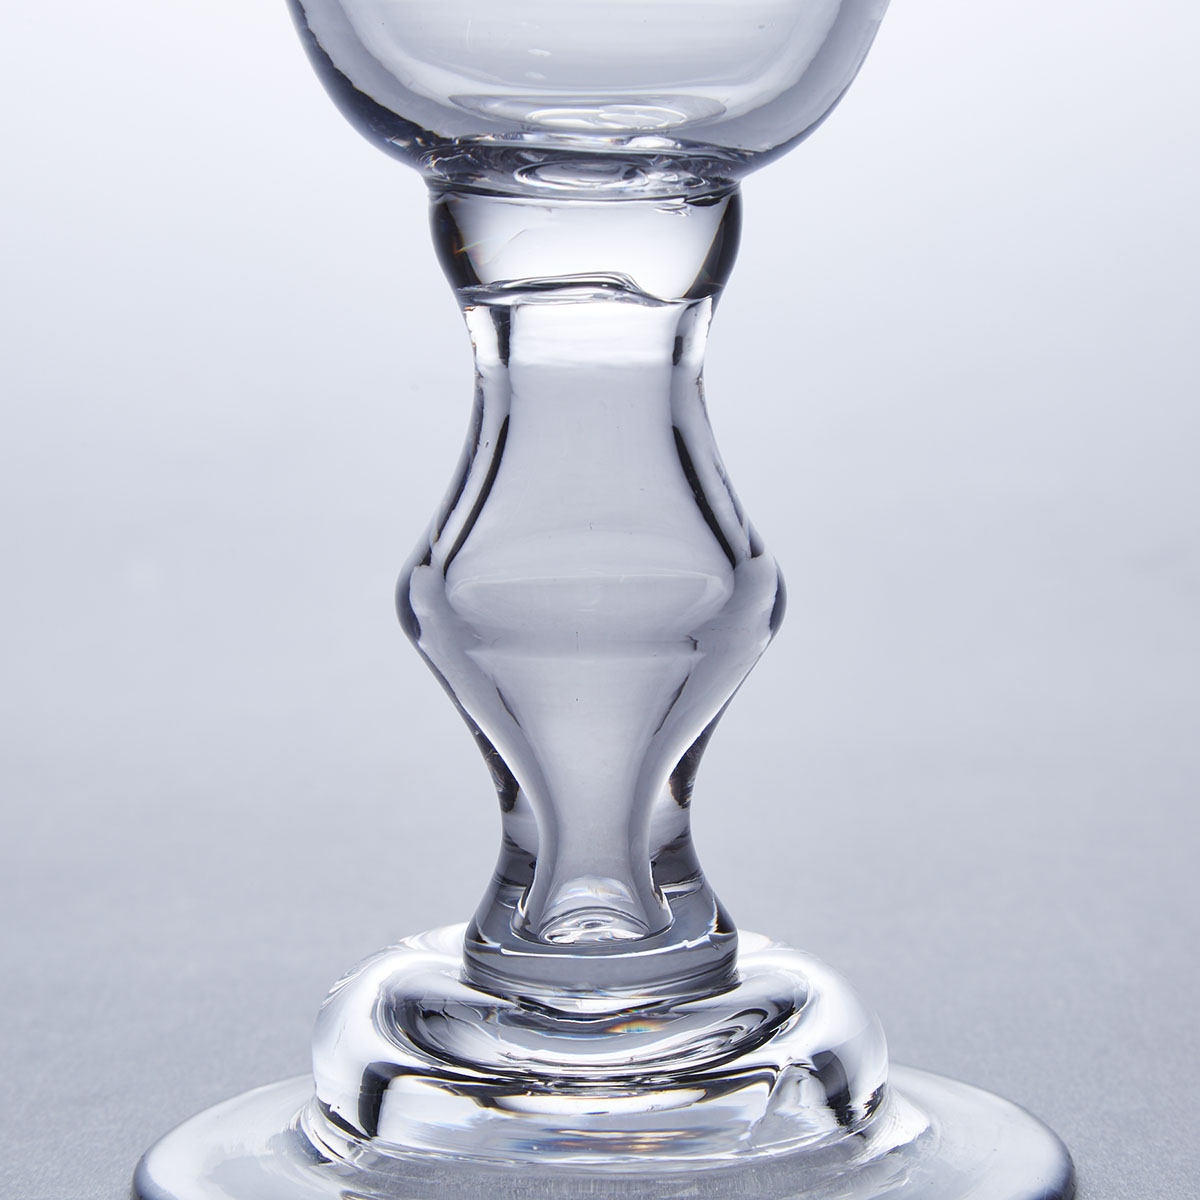 English Angular Knopped Balustroid Stemmed Sweetmeat or Champagne Glass, c.1730 